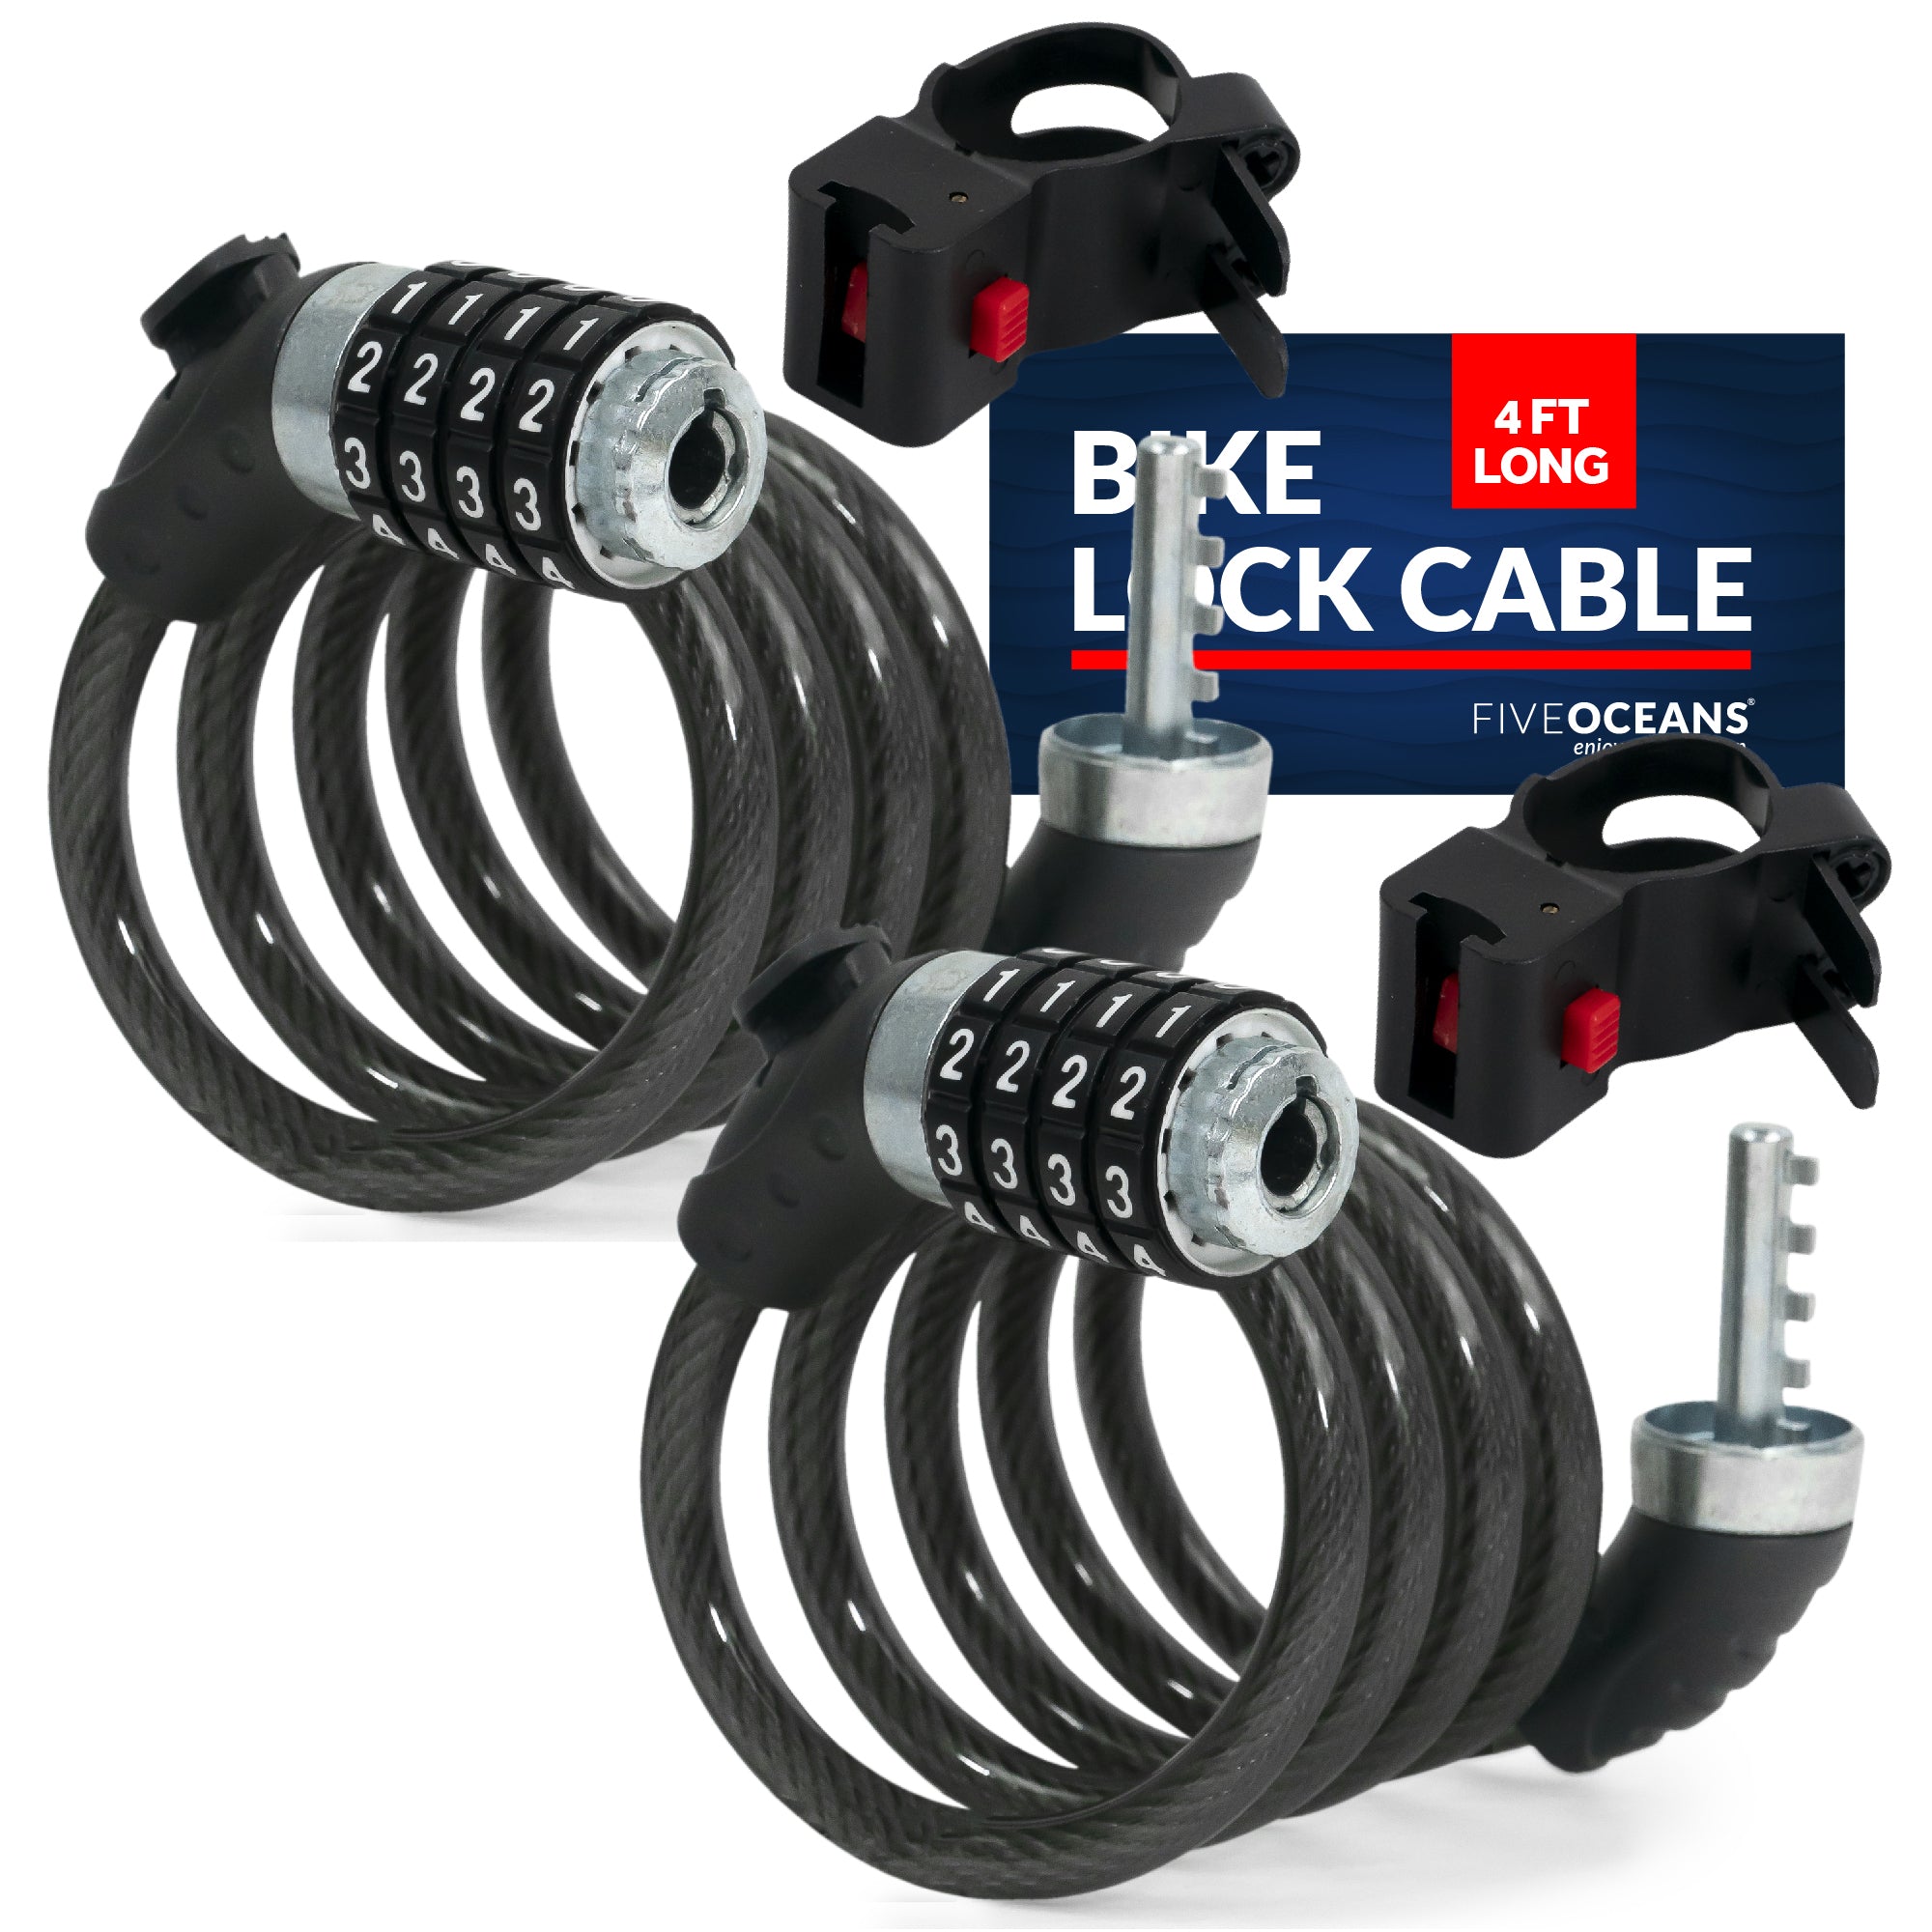 Bike Lock Cable, Combination Anti Theft, 4', 2-Pack - FO3957-M2